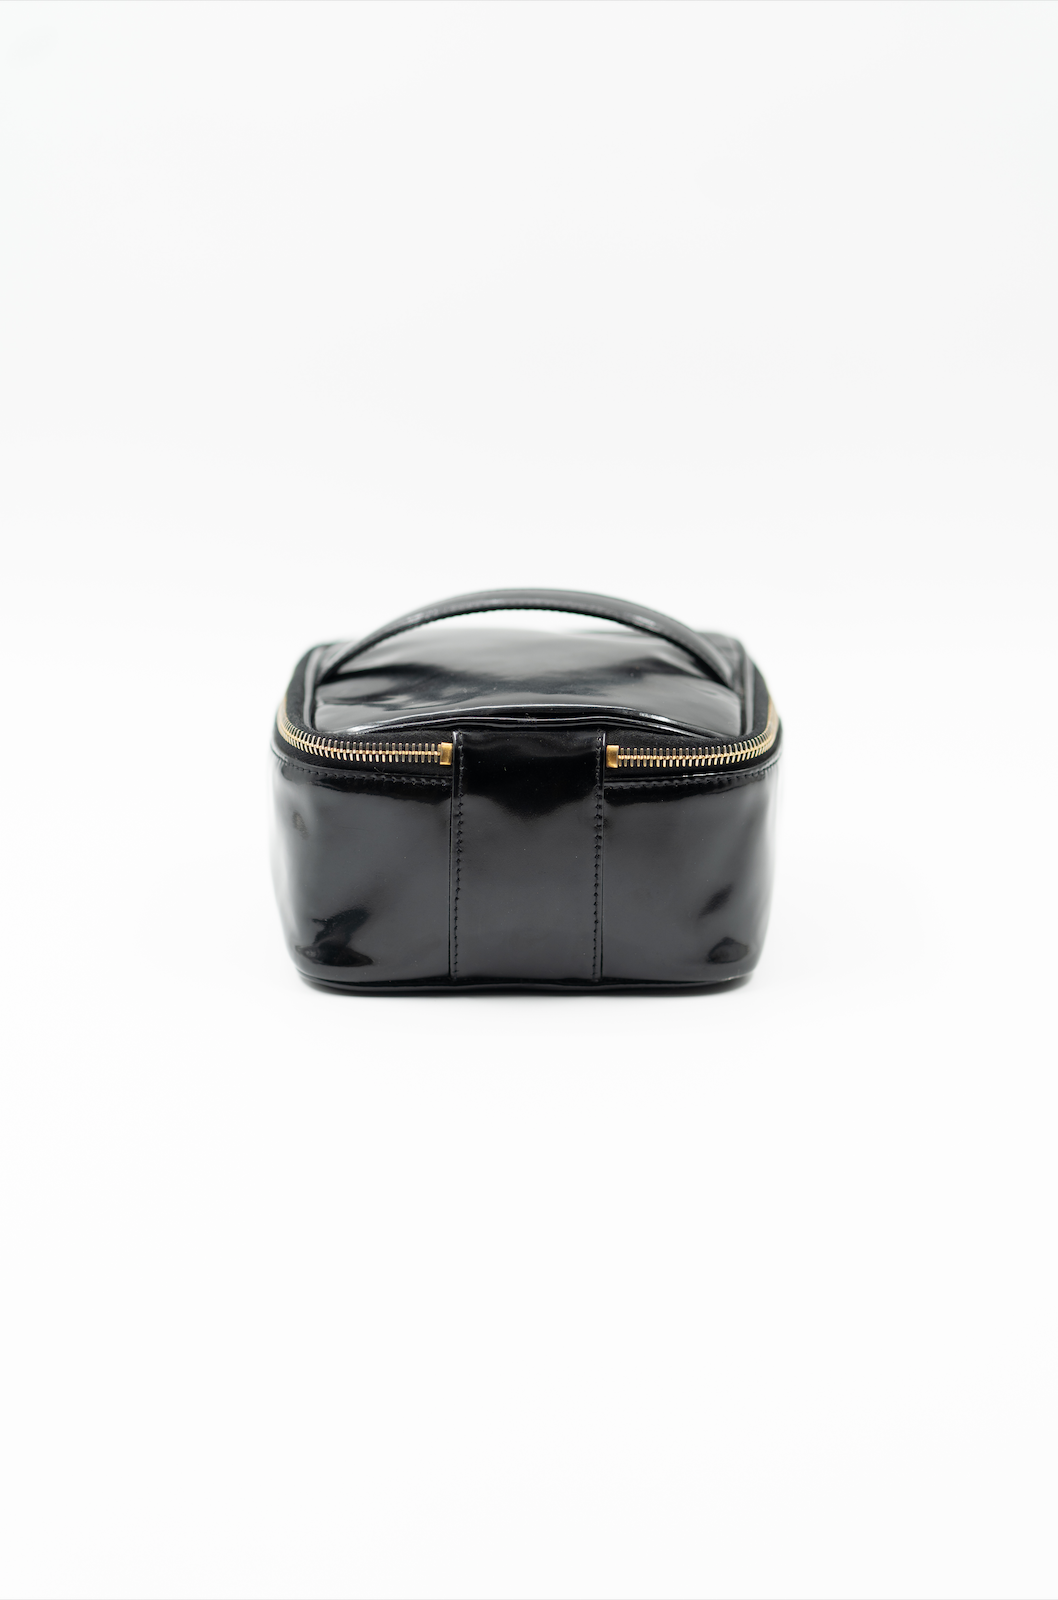 Chanel vanity bag in patent leather